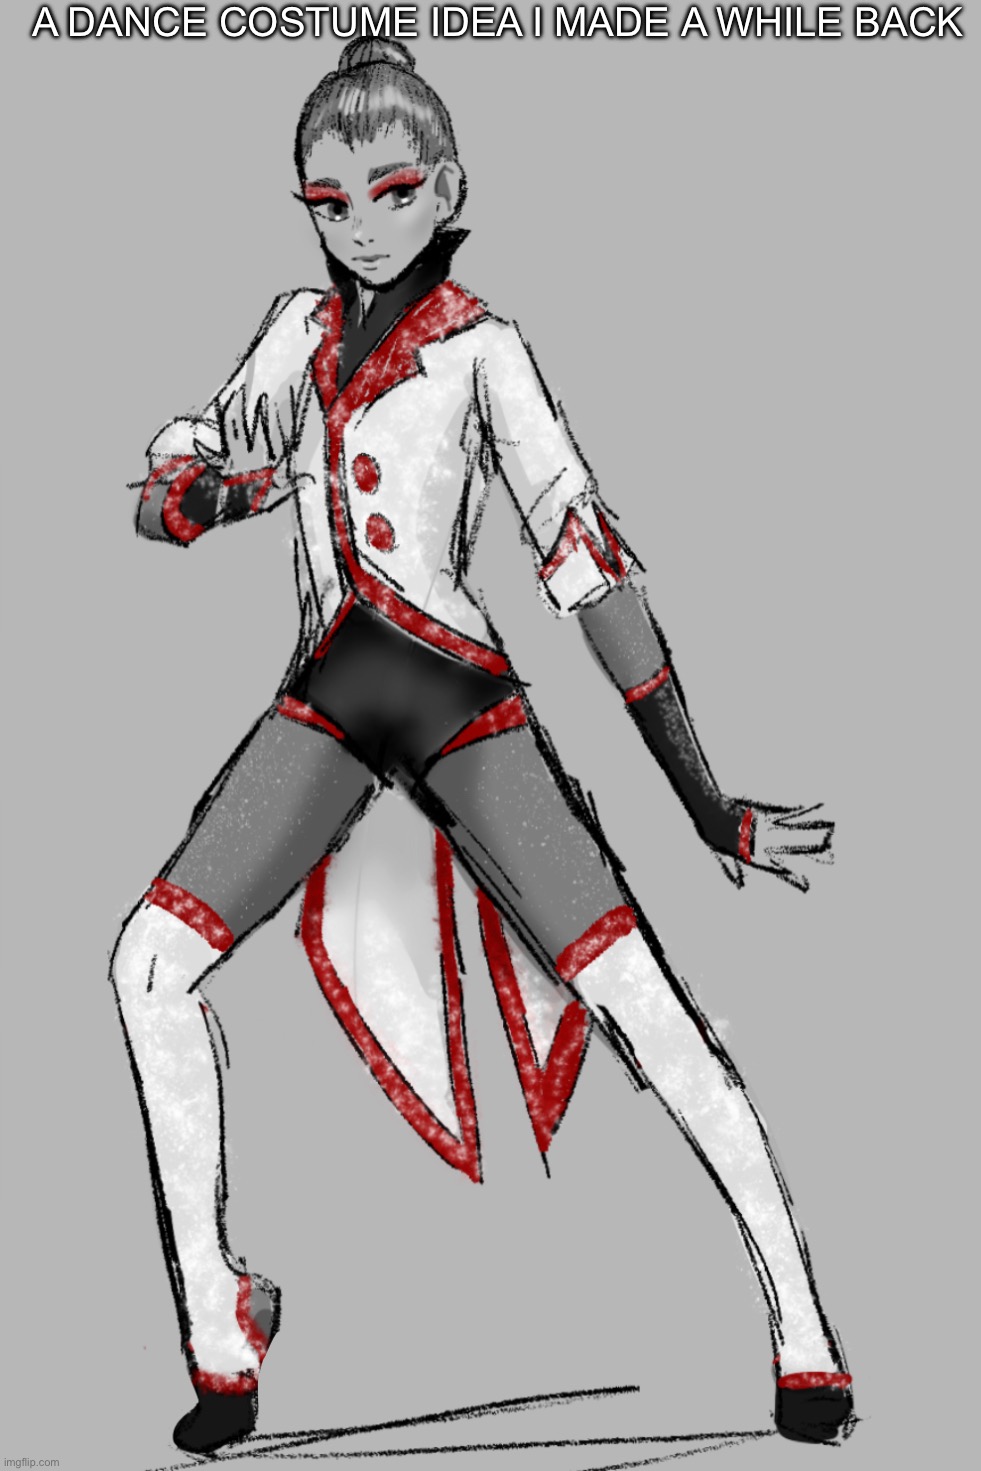 i still like it tbh | A DANCE COSTUME IDEA I MADE A WHILE BACK | image tagged in art,drawings,drawing,sketch | made w/ Imgflip meme maker